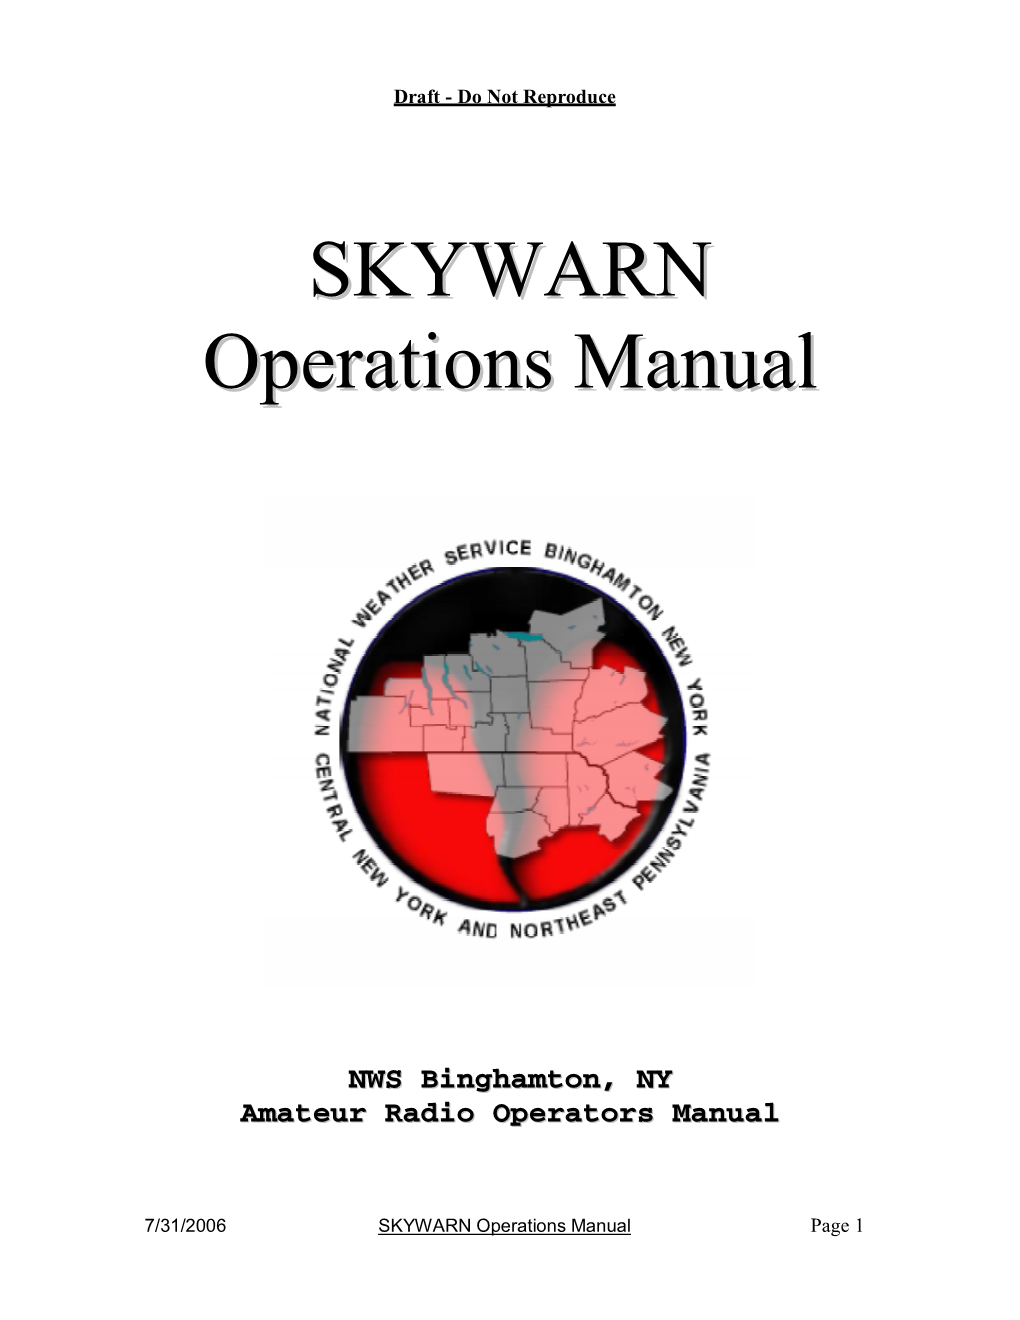 SKYWARN Operations Manual Page 1 Draft - Do Not Reproduce